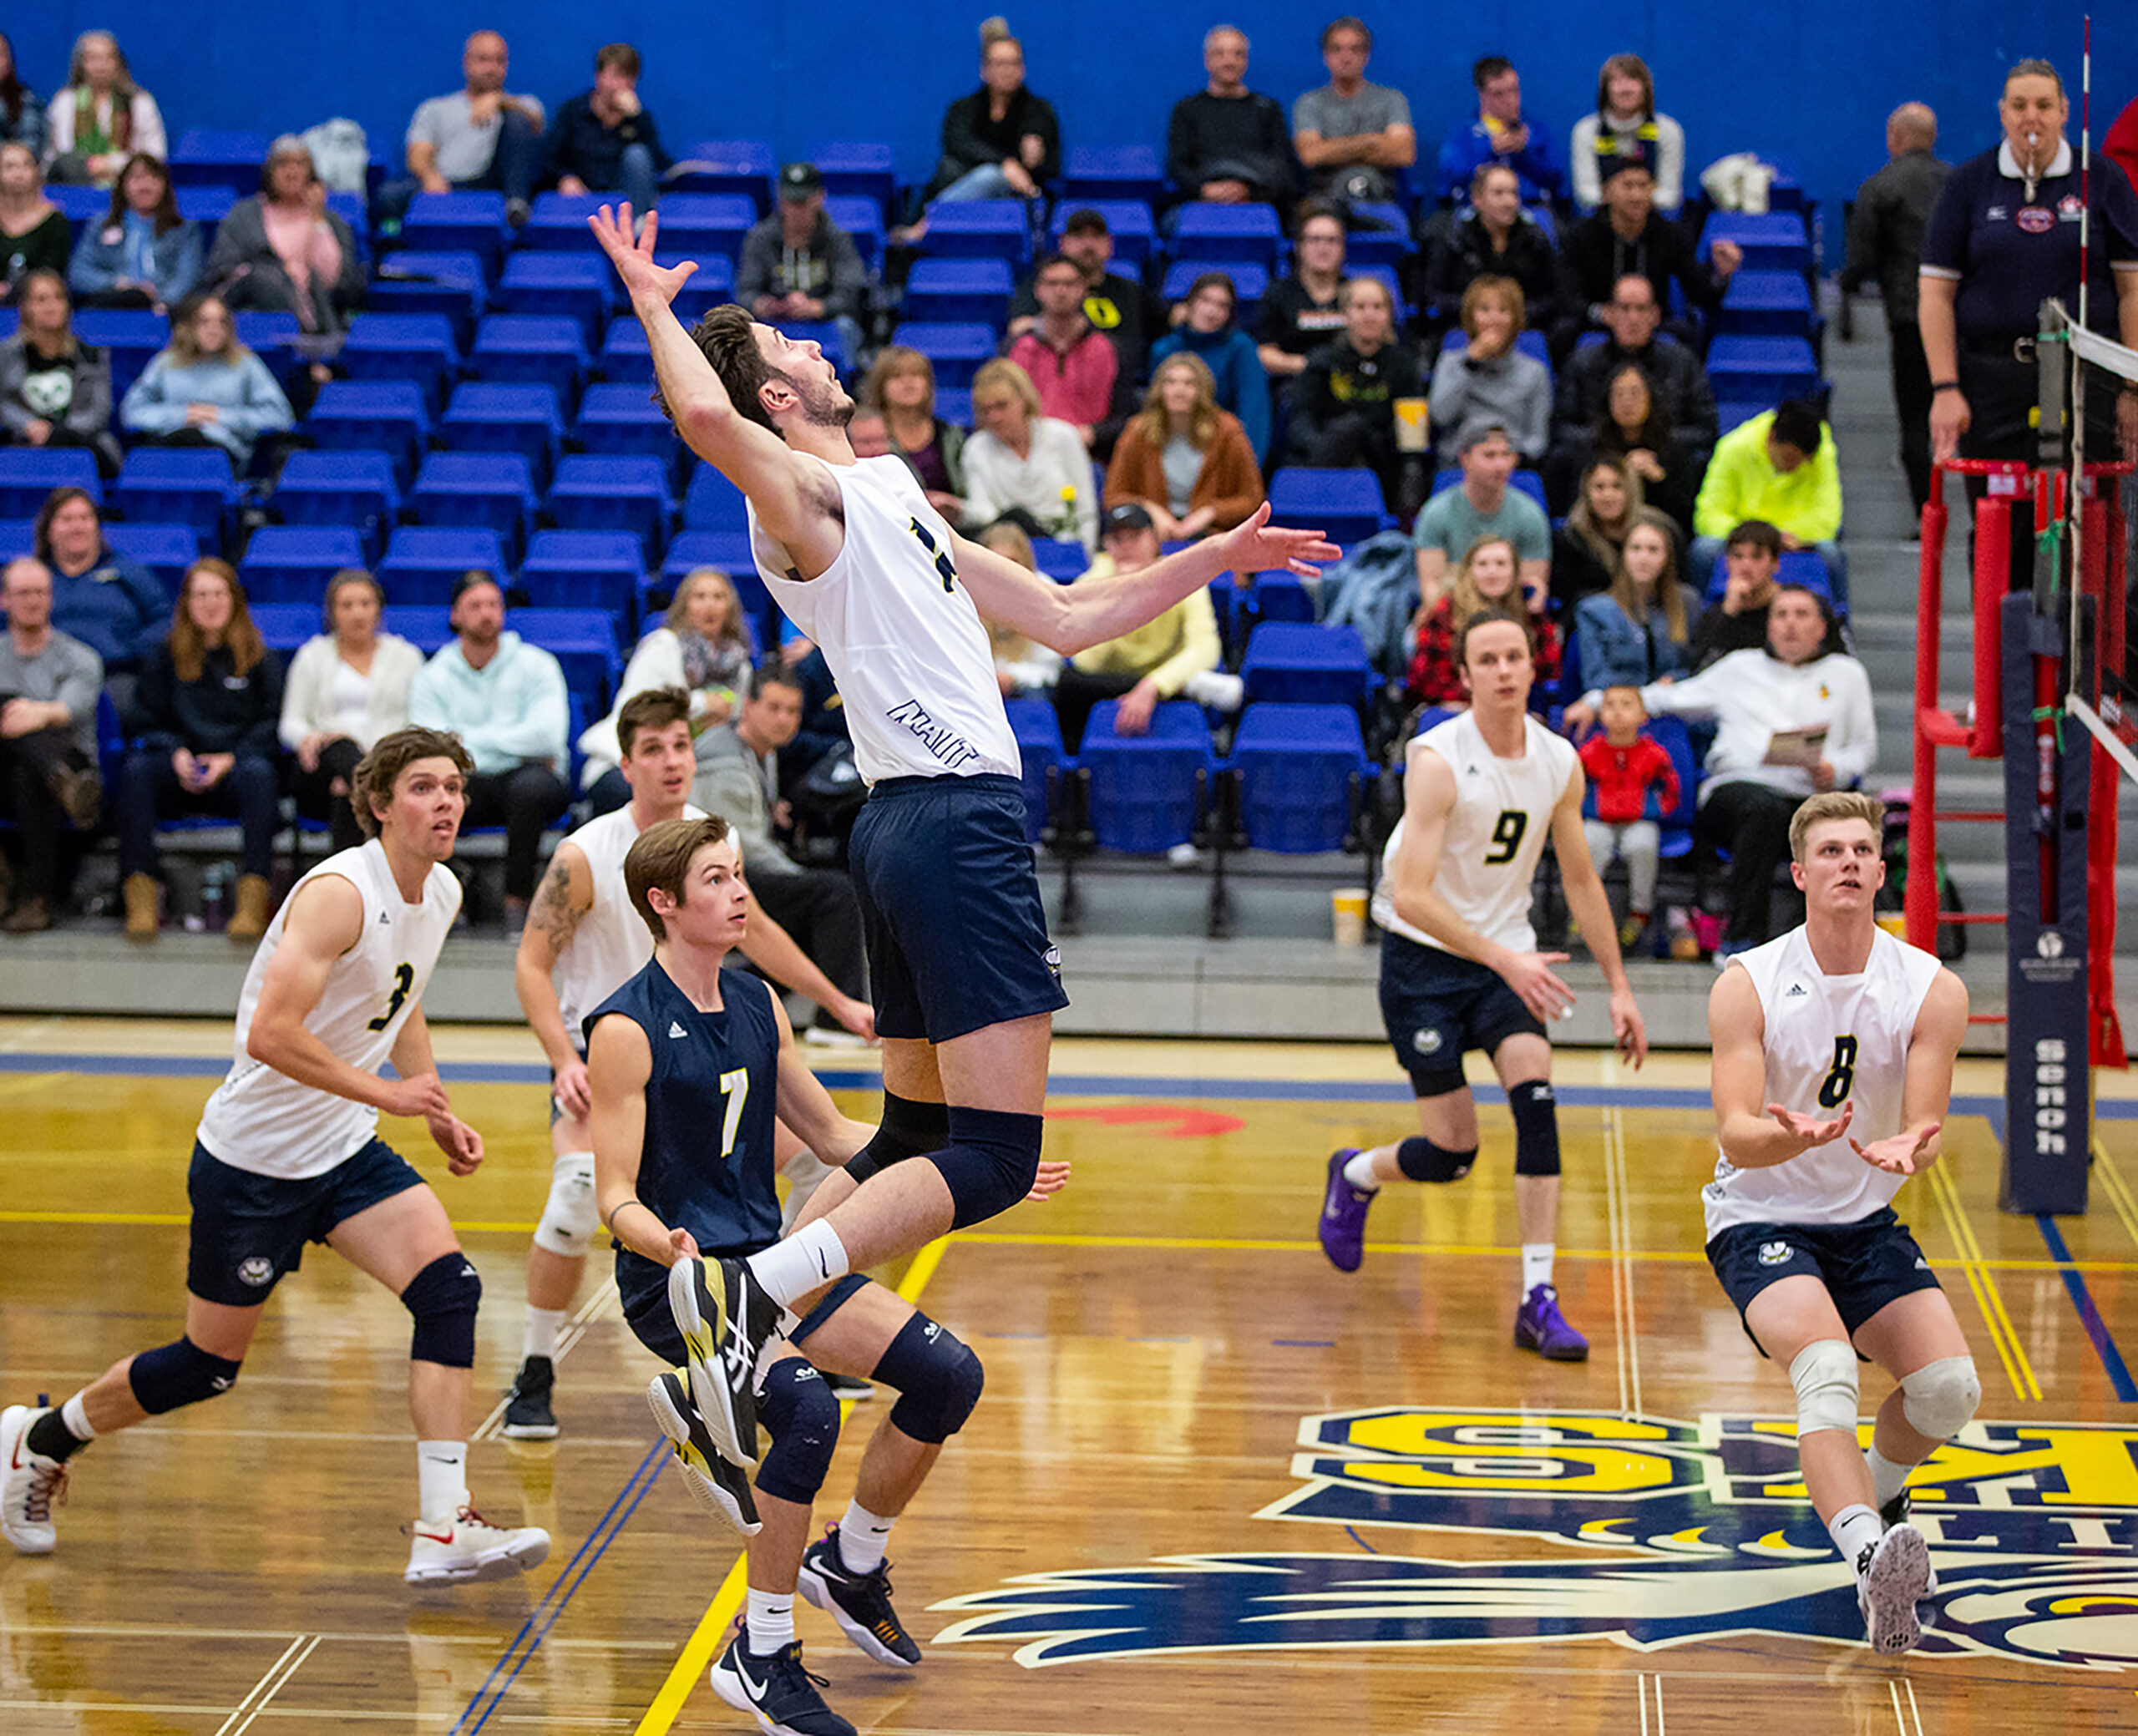 New Men's Volleyball Coach Leading the NAIT Ooks